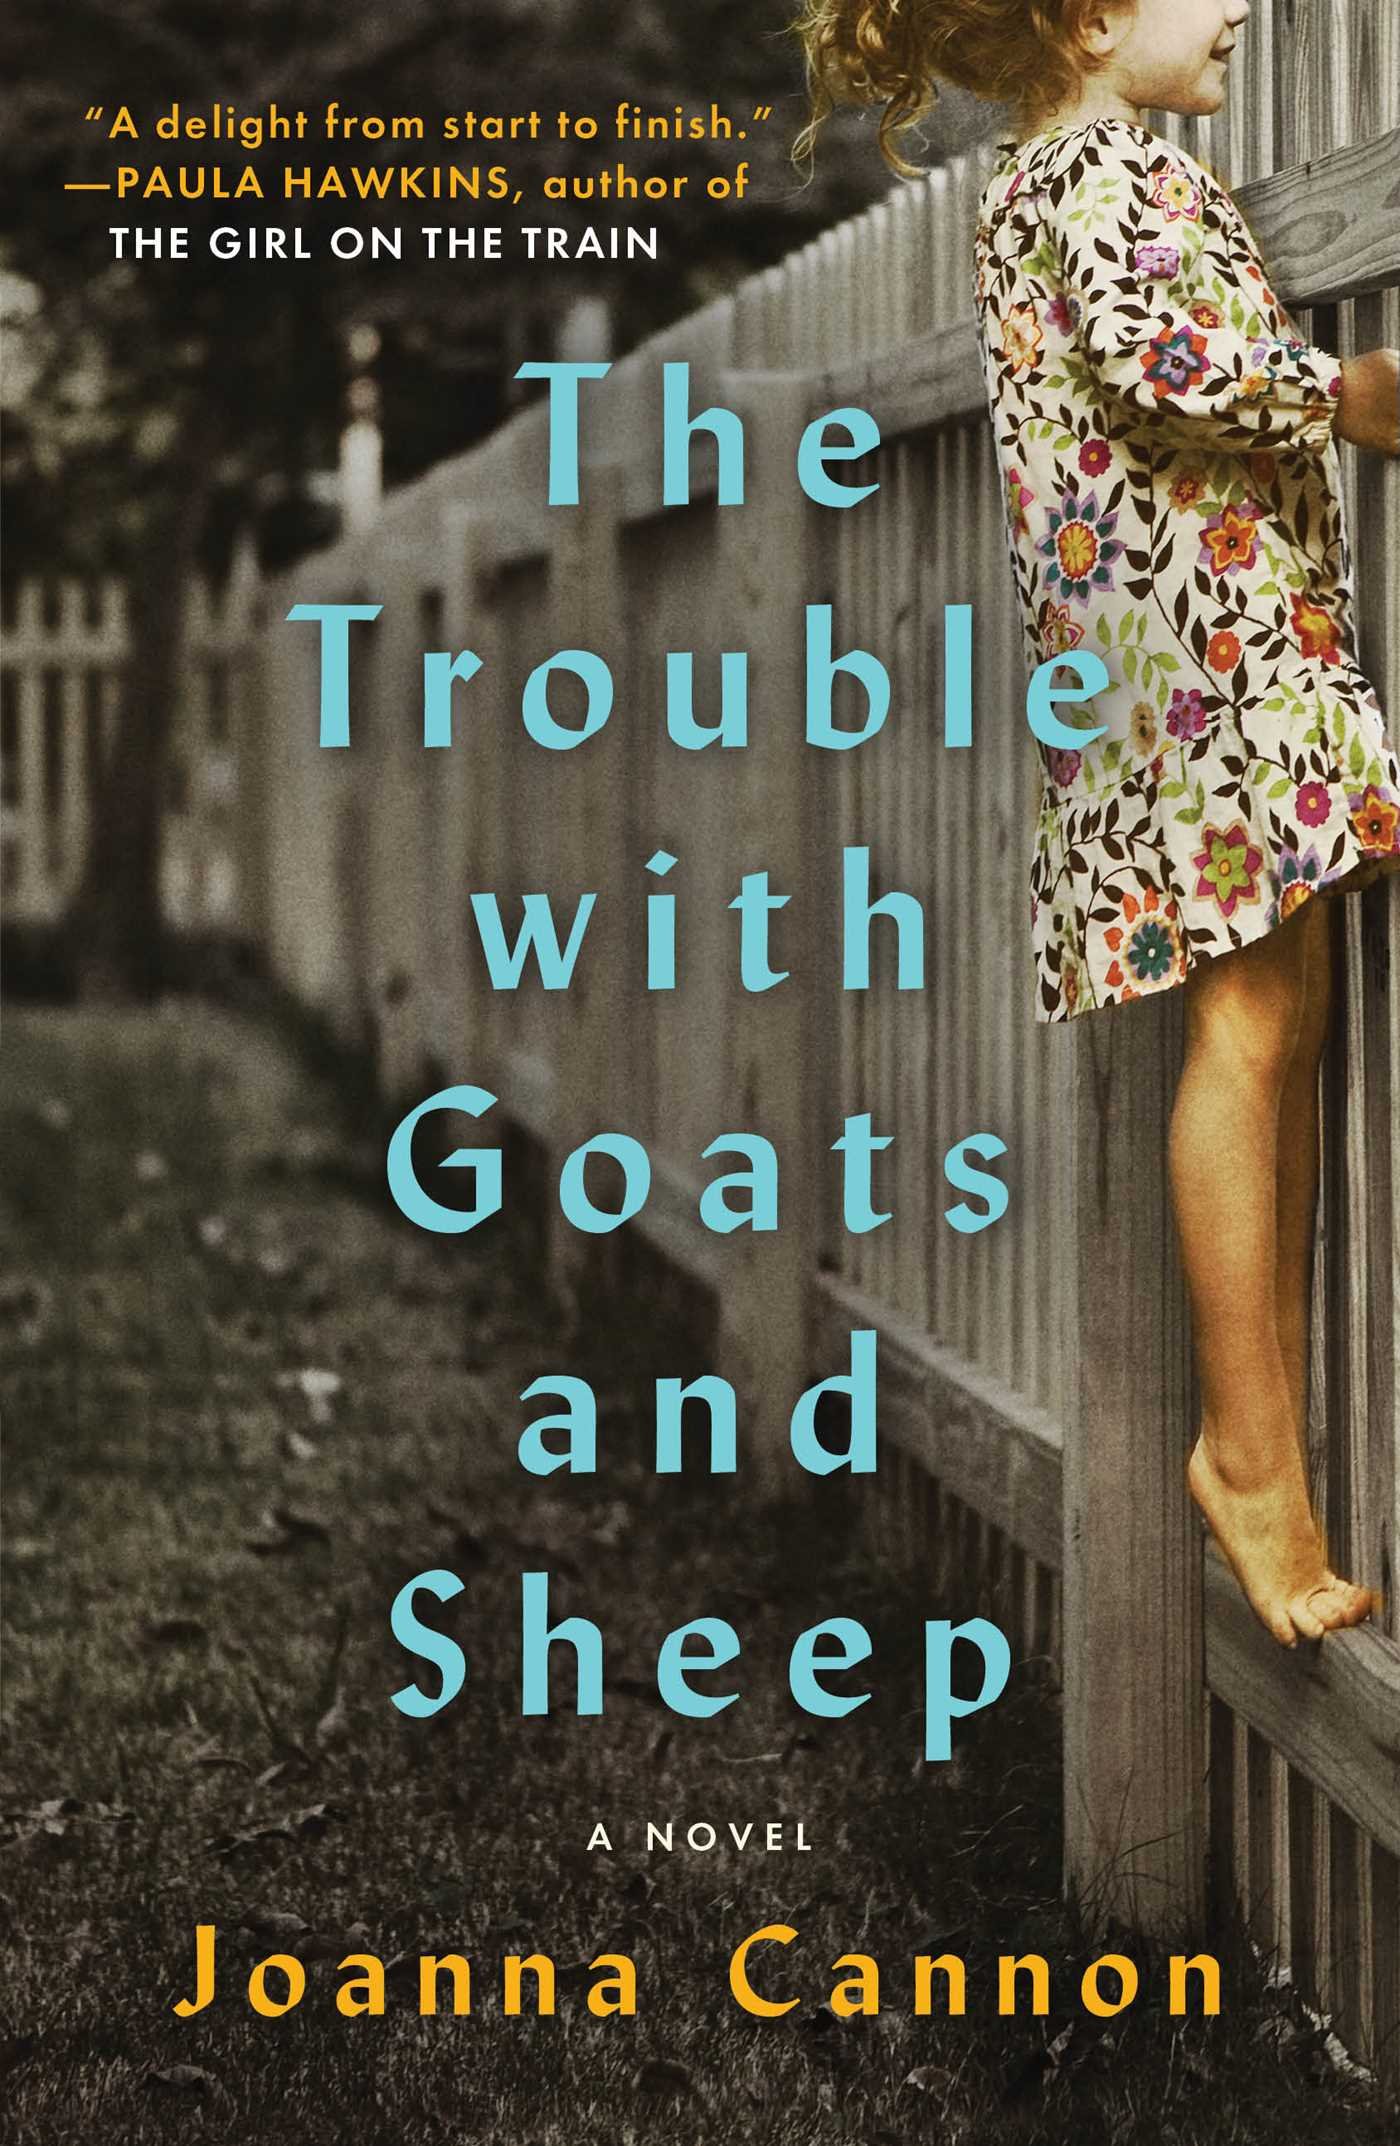 The Trouble With Goats and Sheep, Joanna Cannon